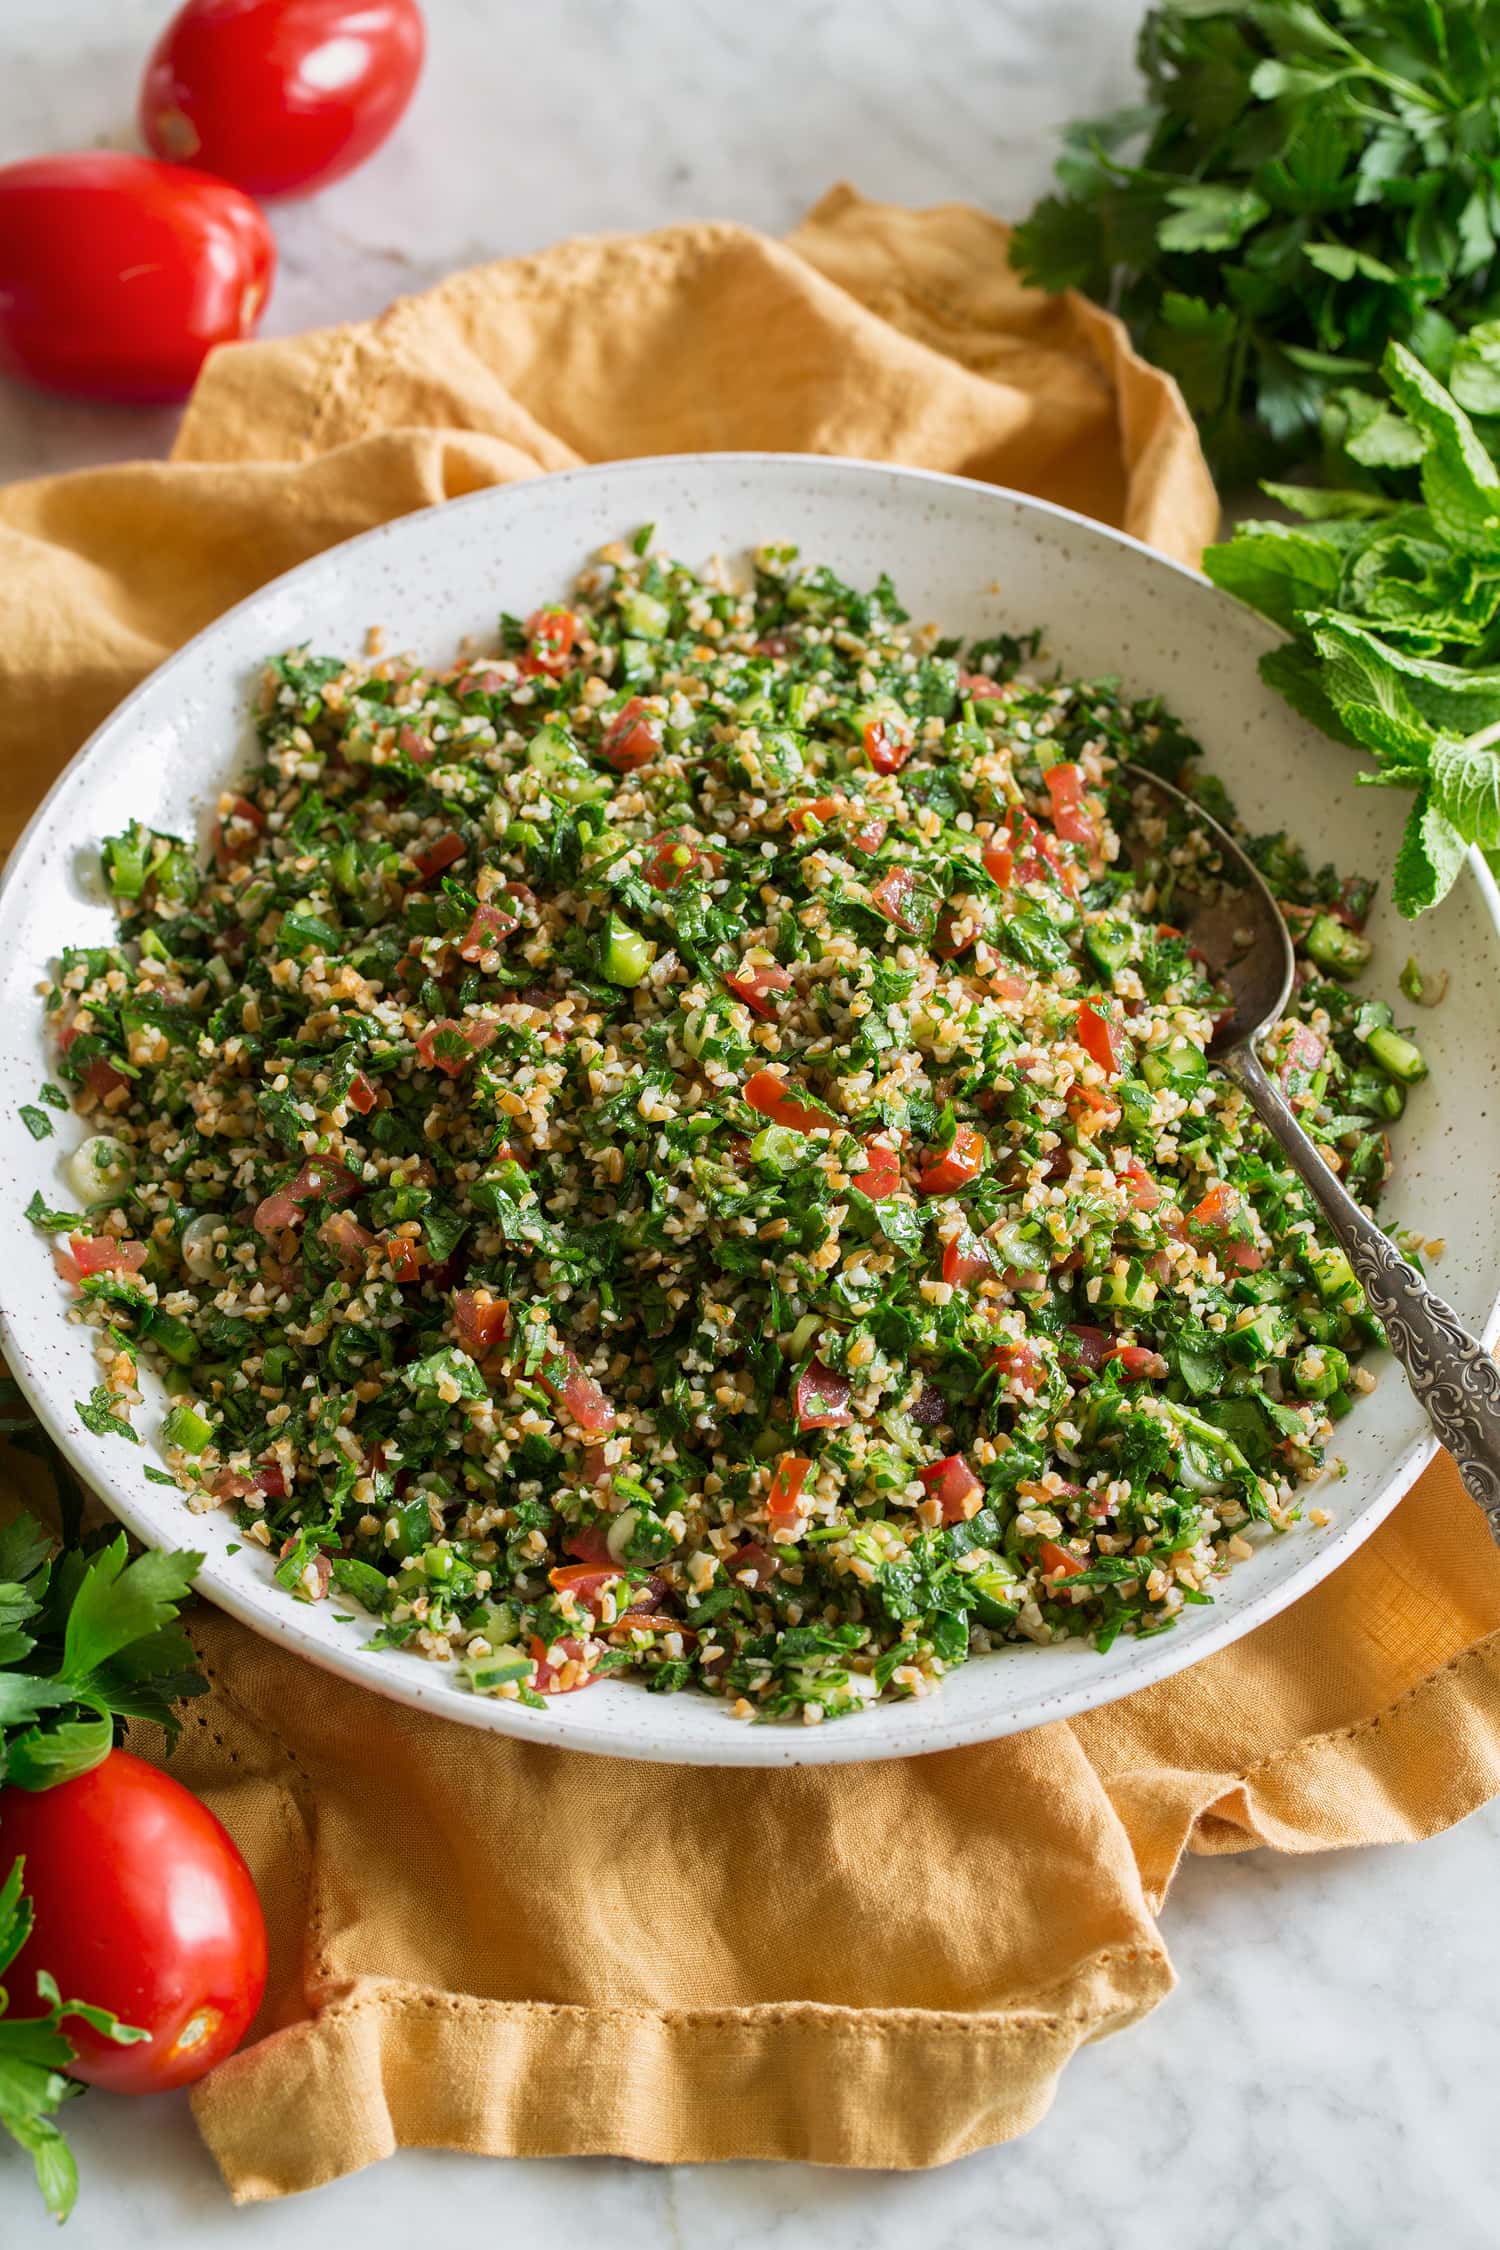 Herb tabbouleh shown in a white ceramic bowl over a yellow cloth.